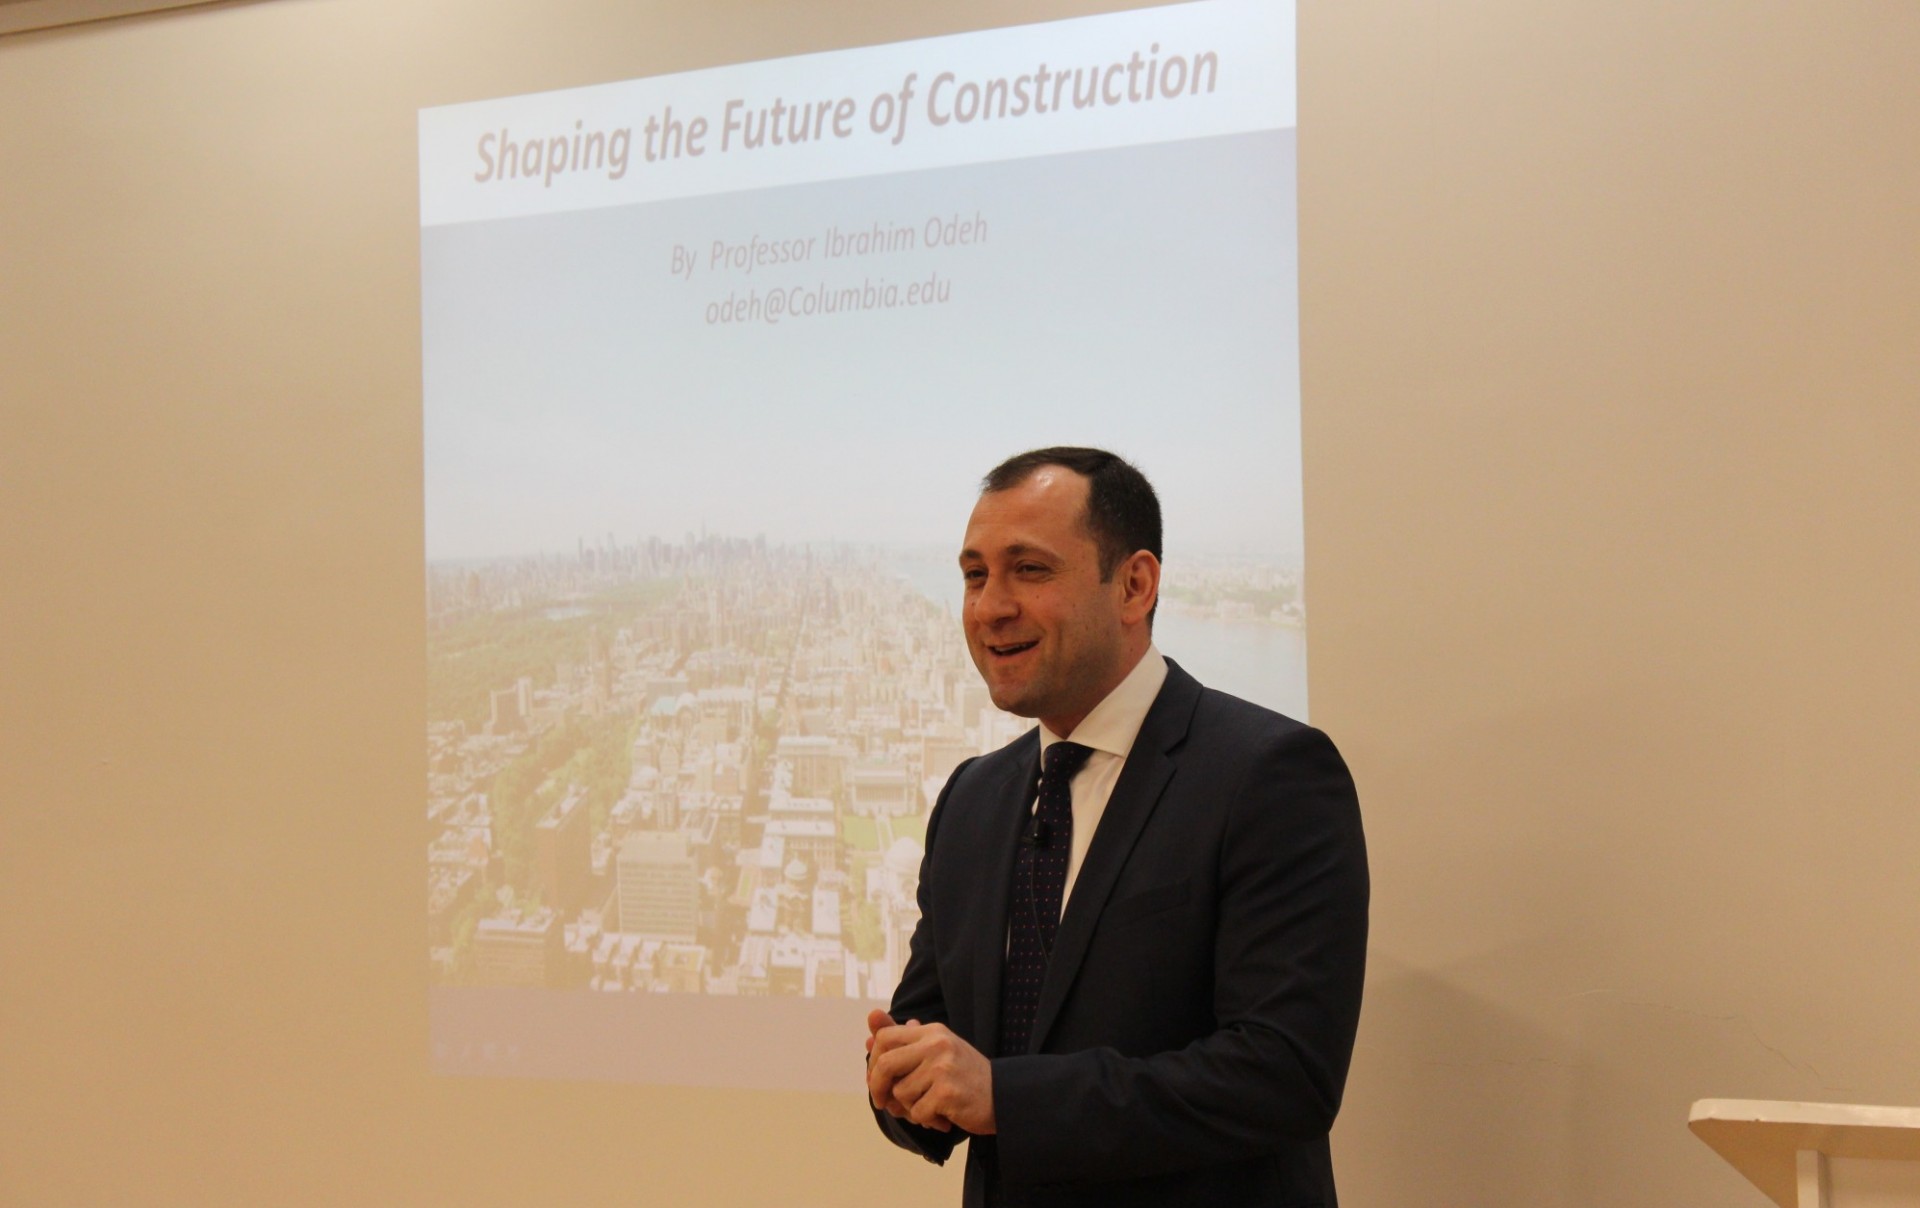 Shaping the Future of Construction